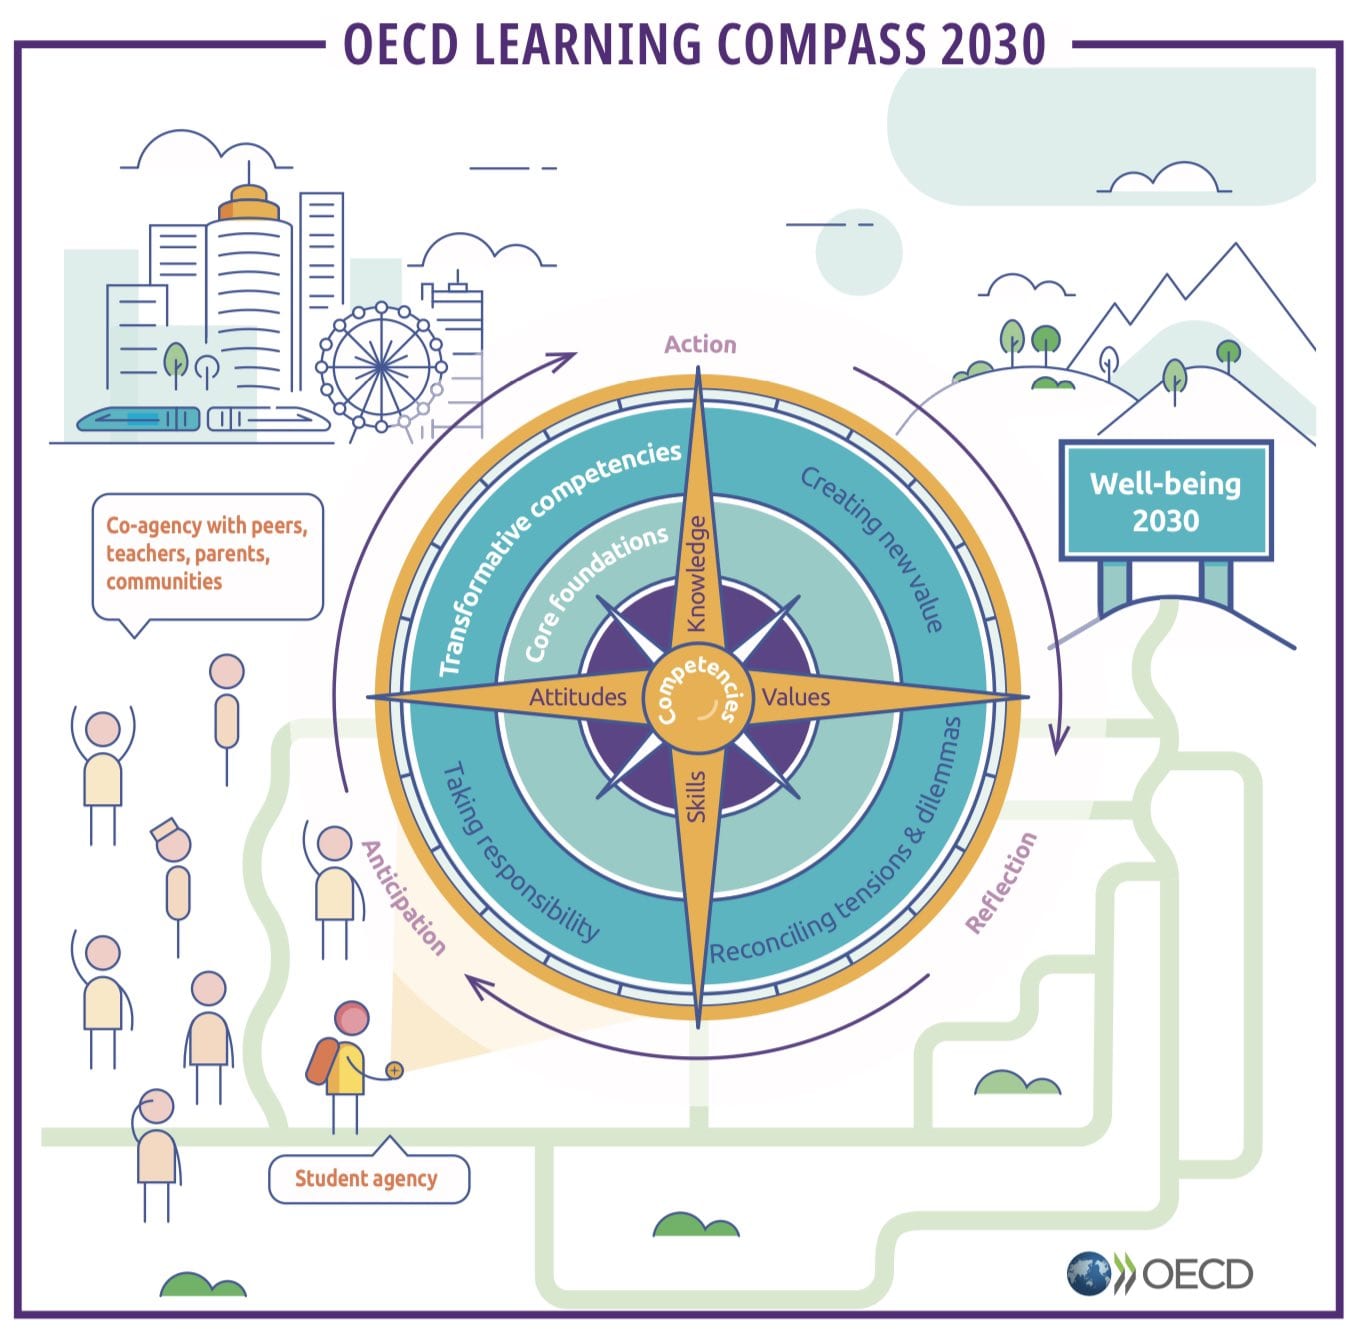 OECD Learning Compass